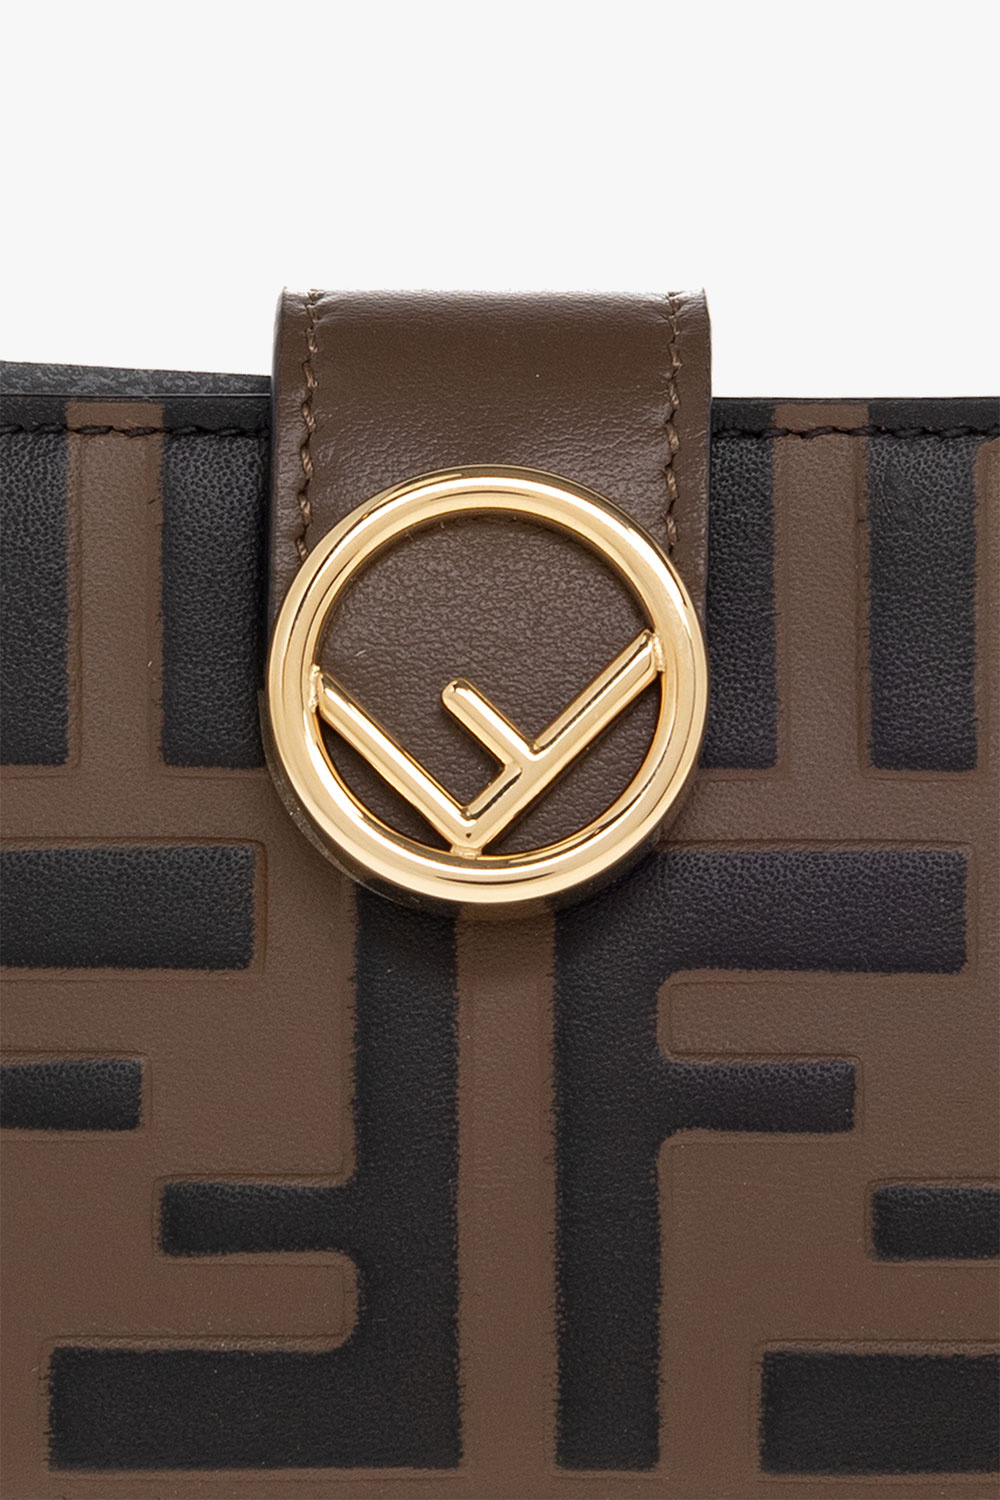 Fendi Wallets and cardholders for Women